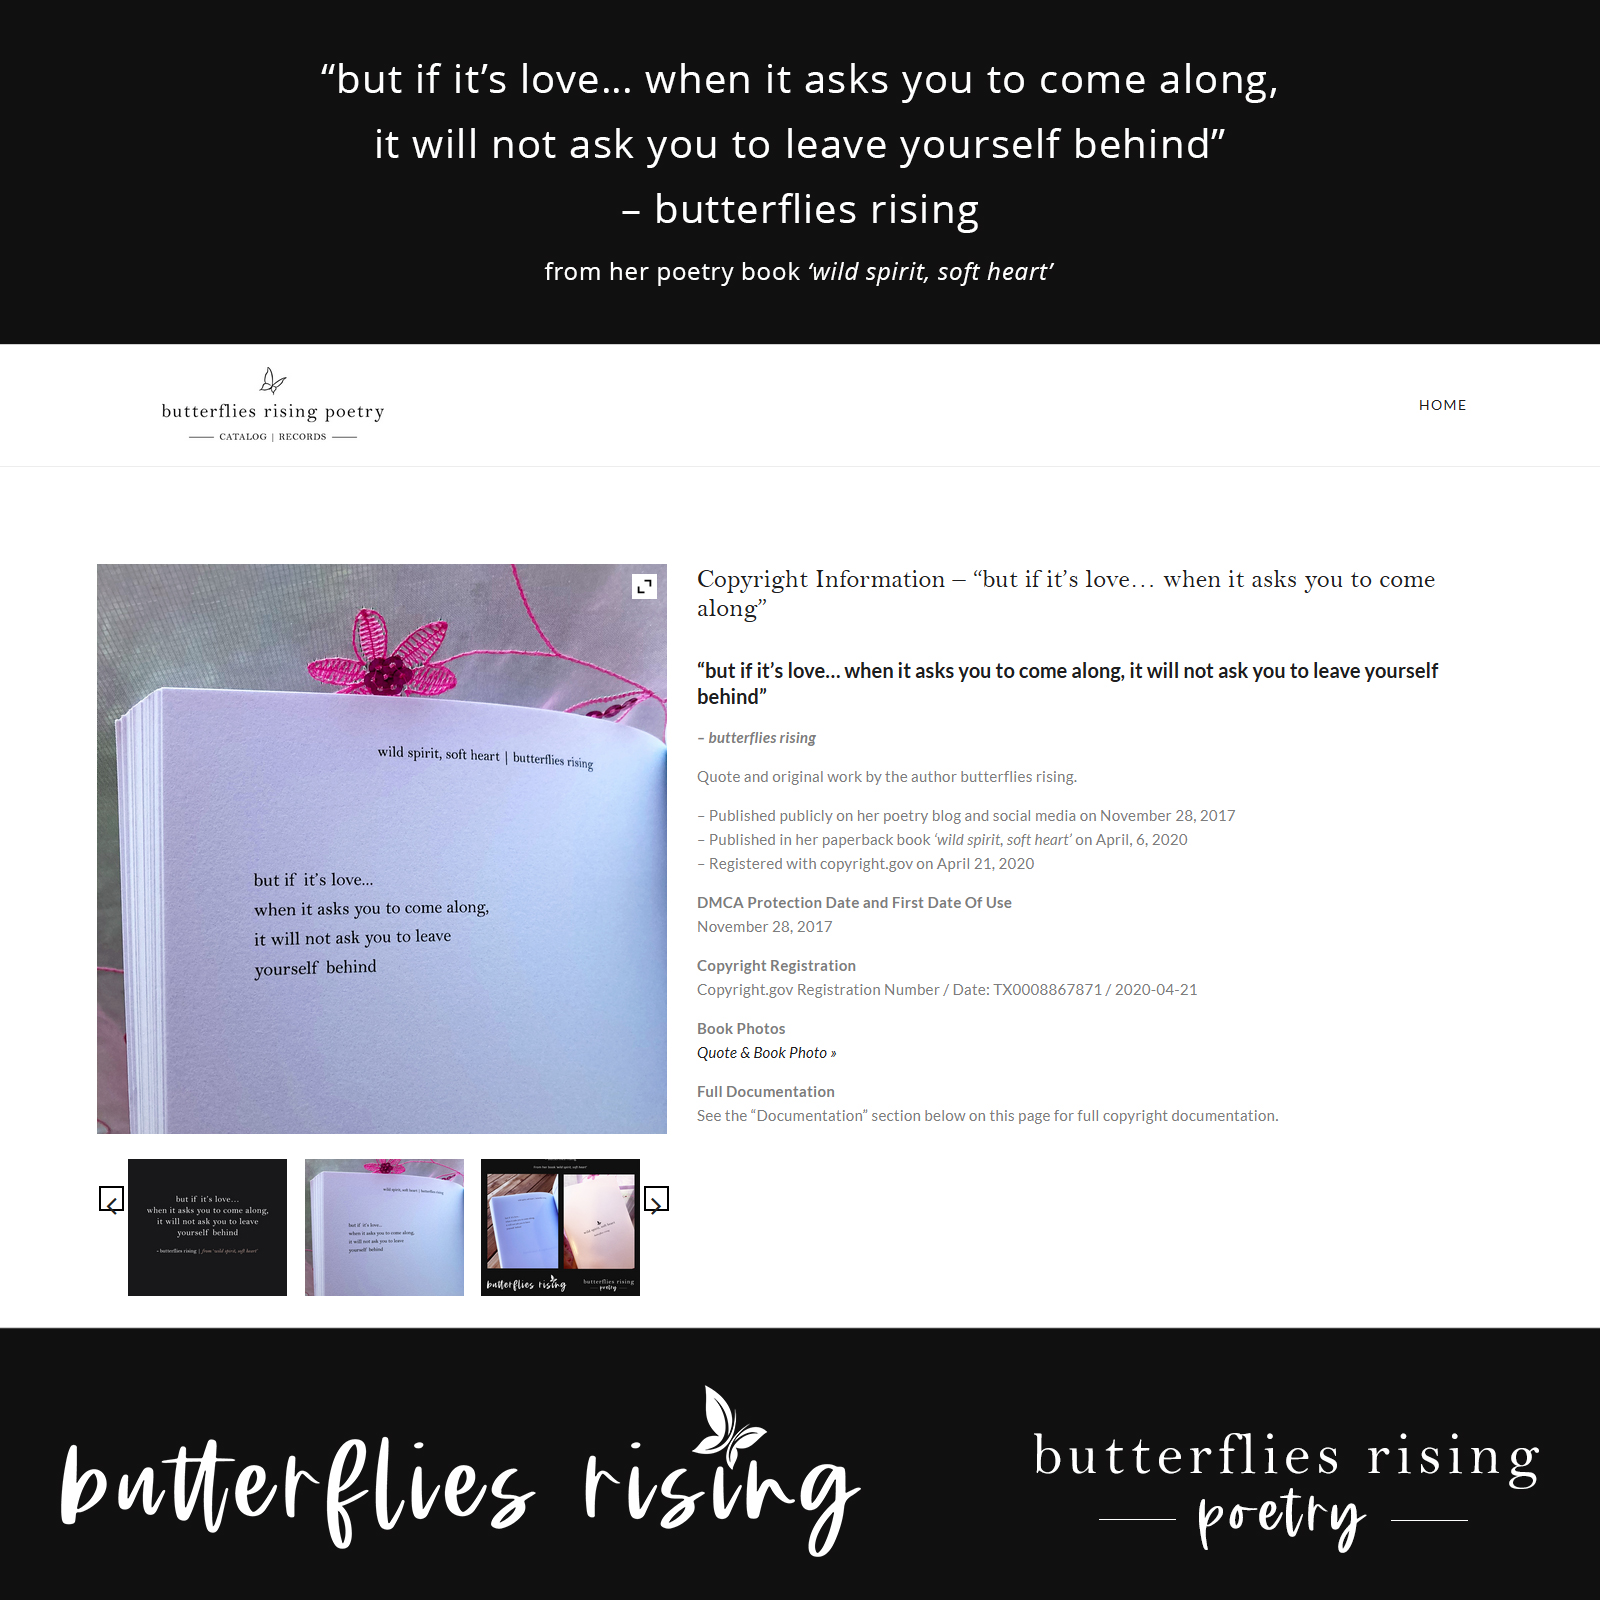 but if it’s love... when it asks you to come along, it will not ask you to leave yourself behind - butterflies rising copyright documentation